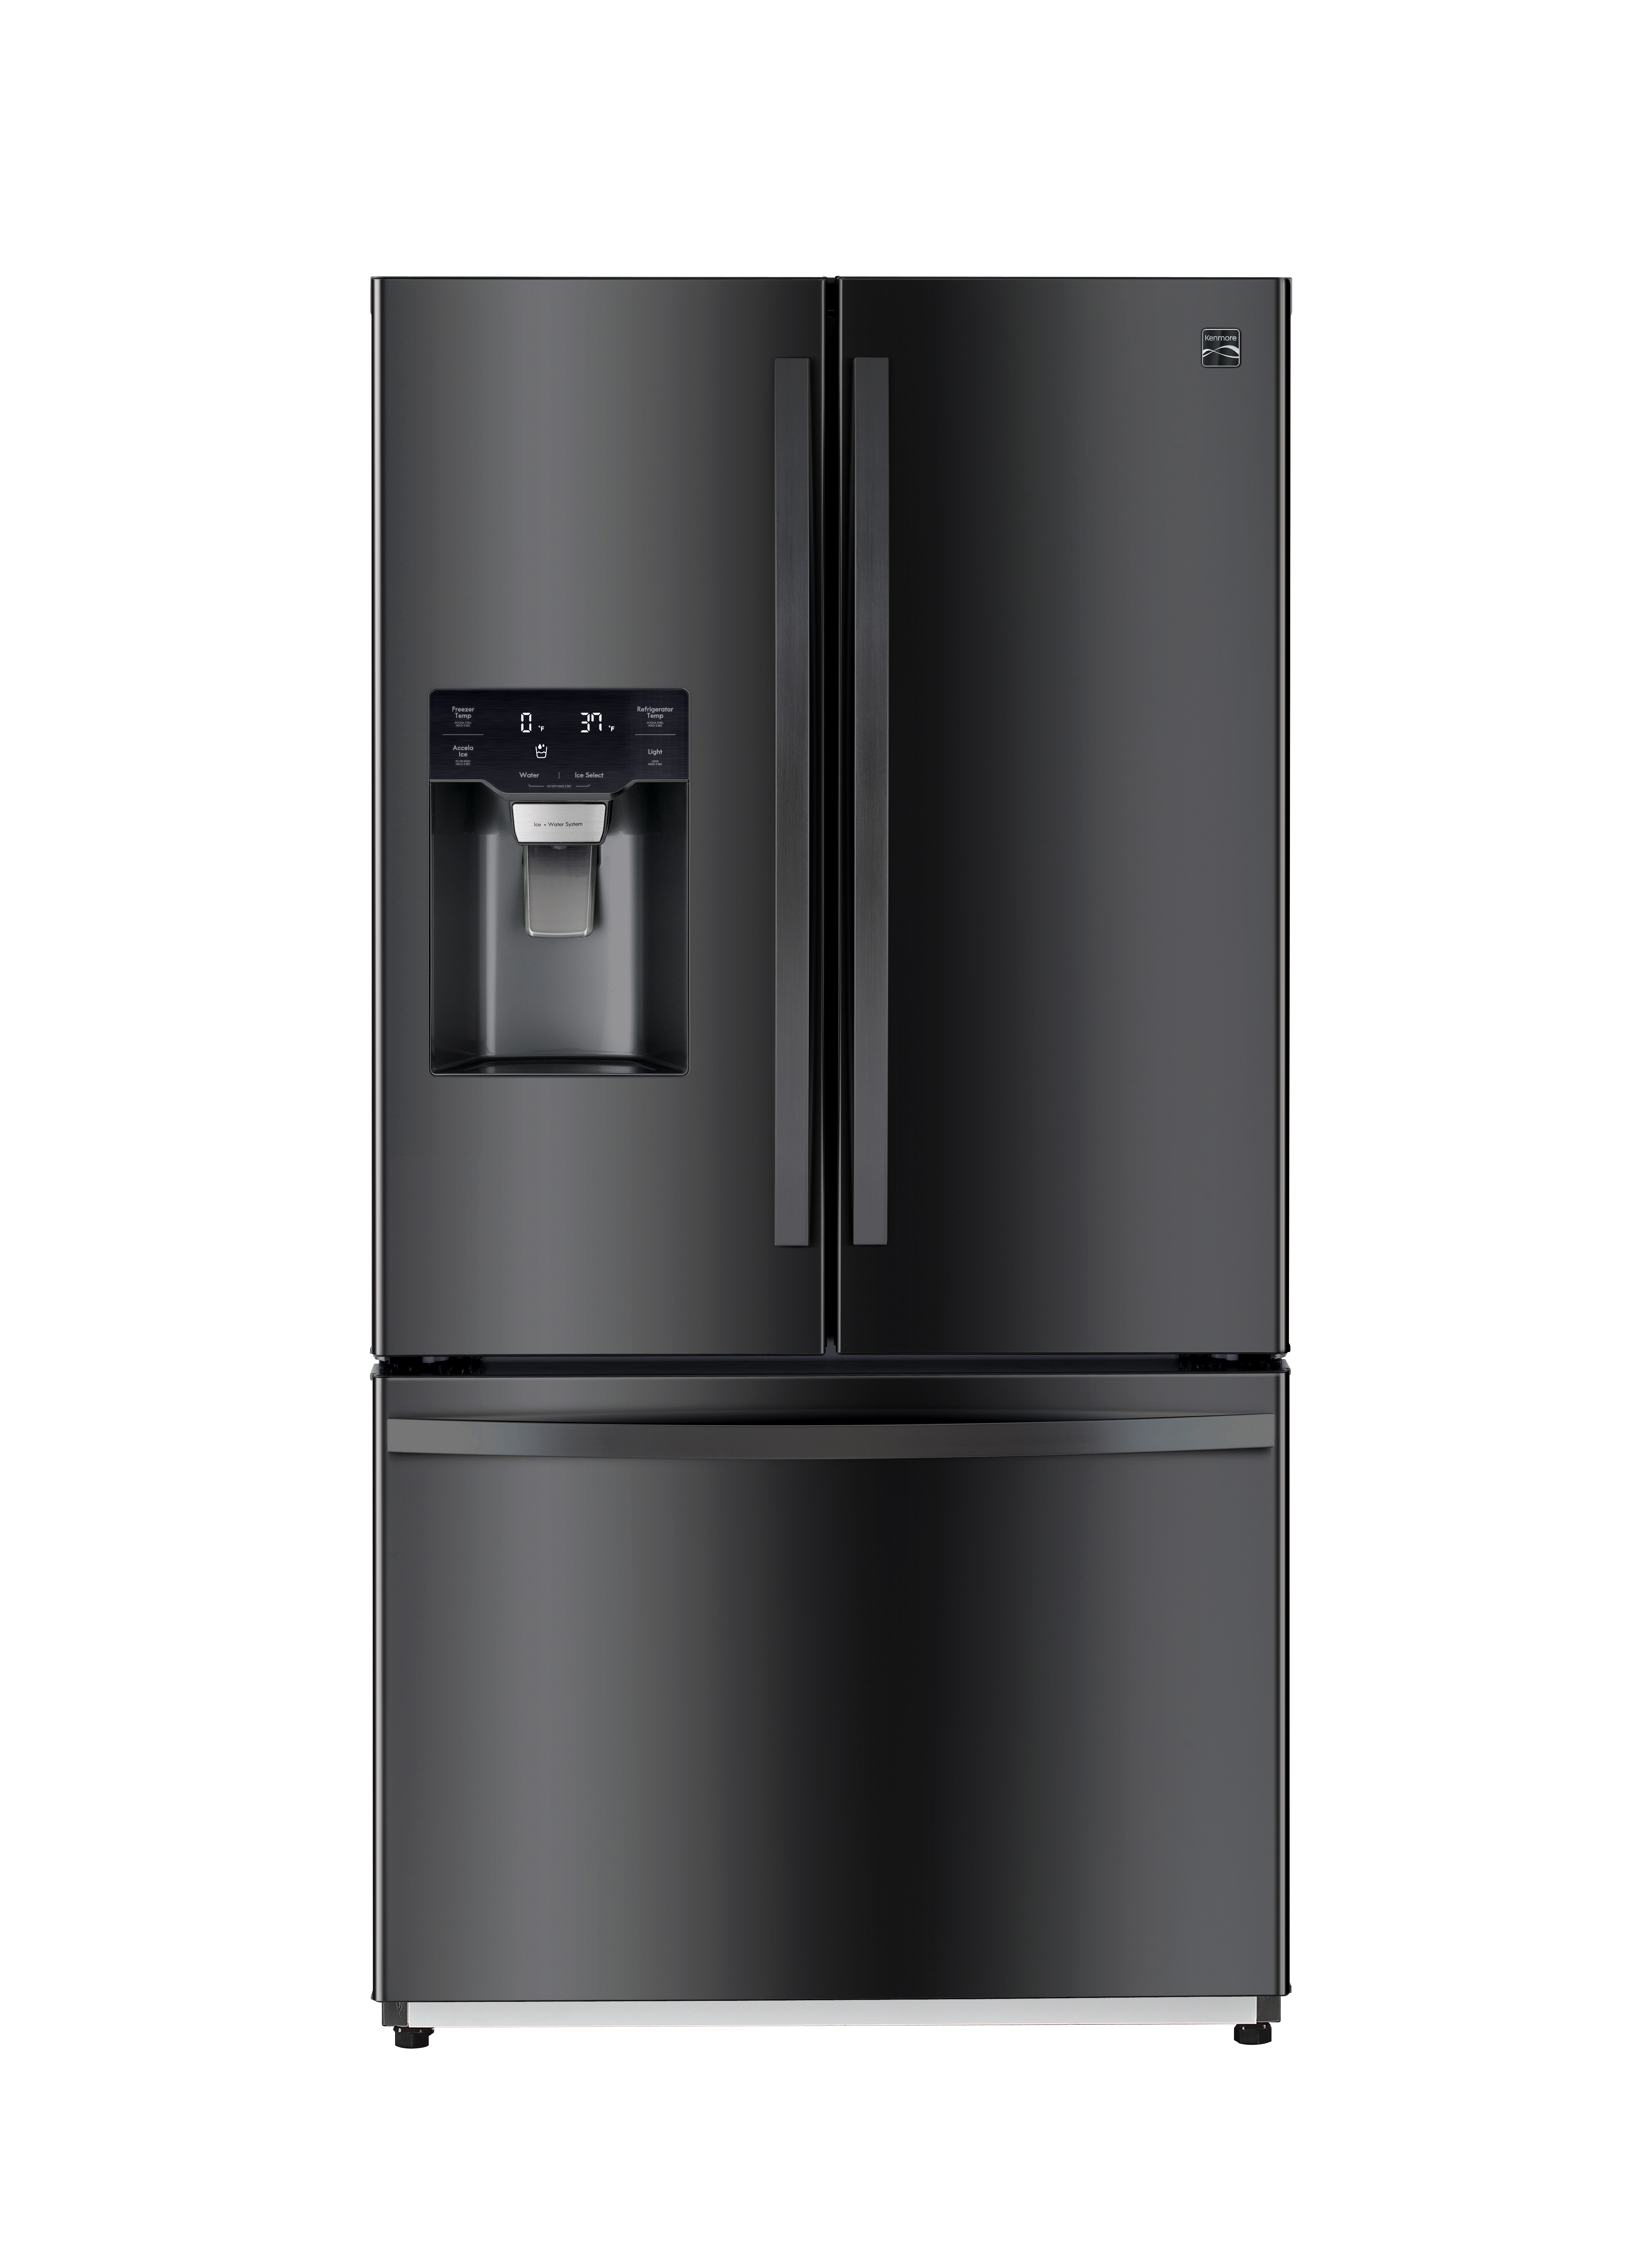 Kenmore 75507 French Door Refrigerator with Dual Ice Makers - Stainless Steel 25.5 cu. ft Black